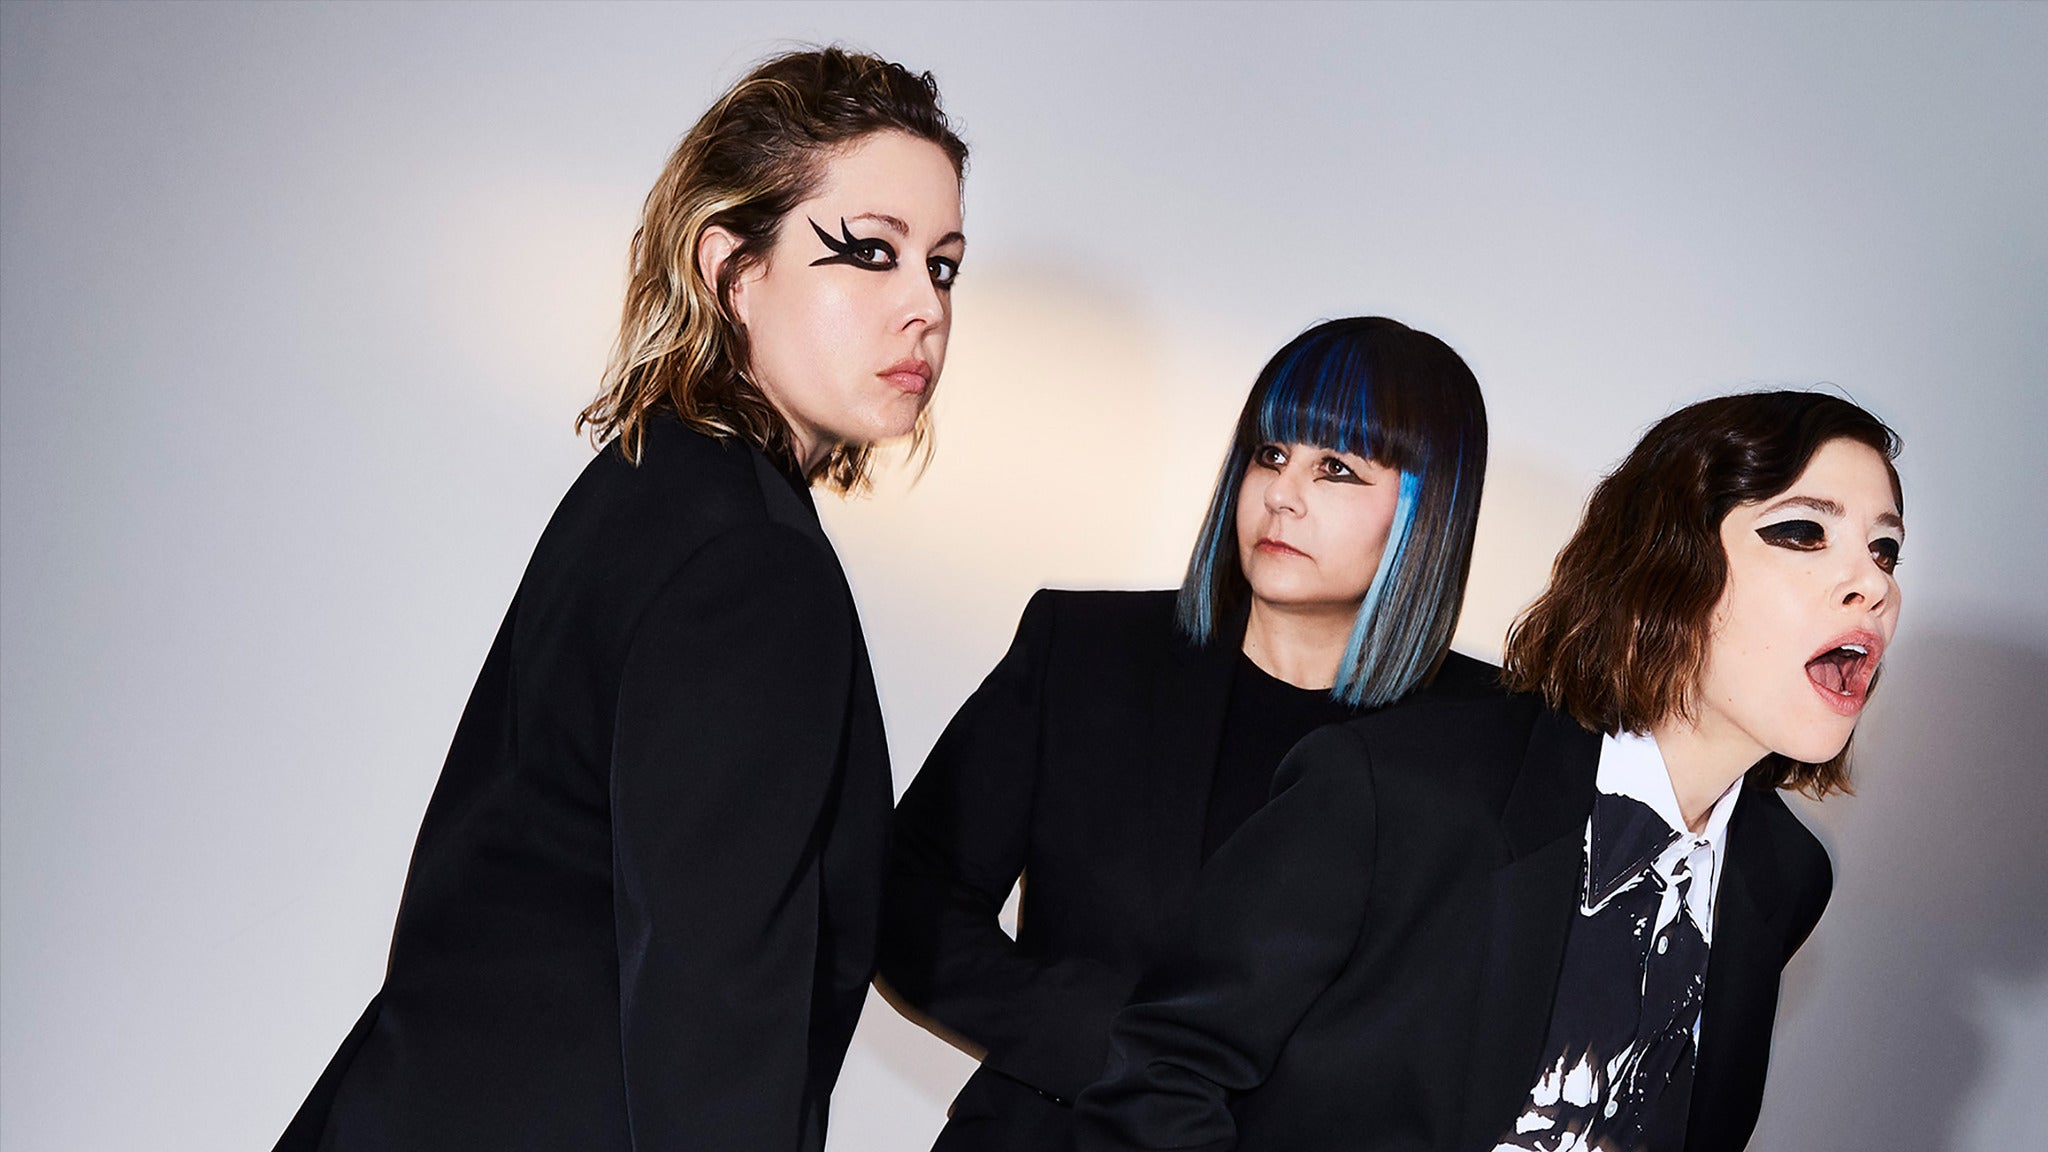 Main image for event titled Sleater-Kinney